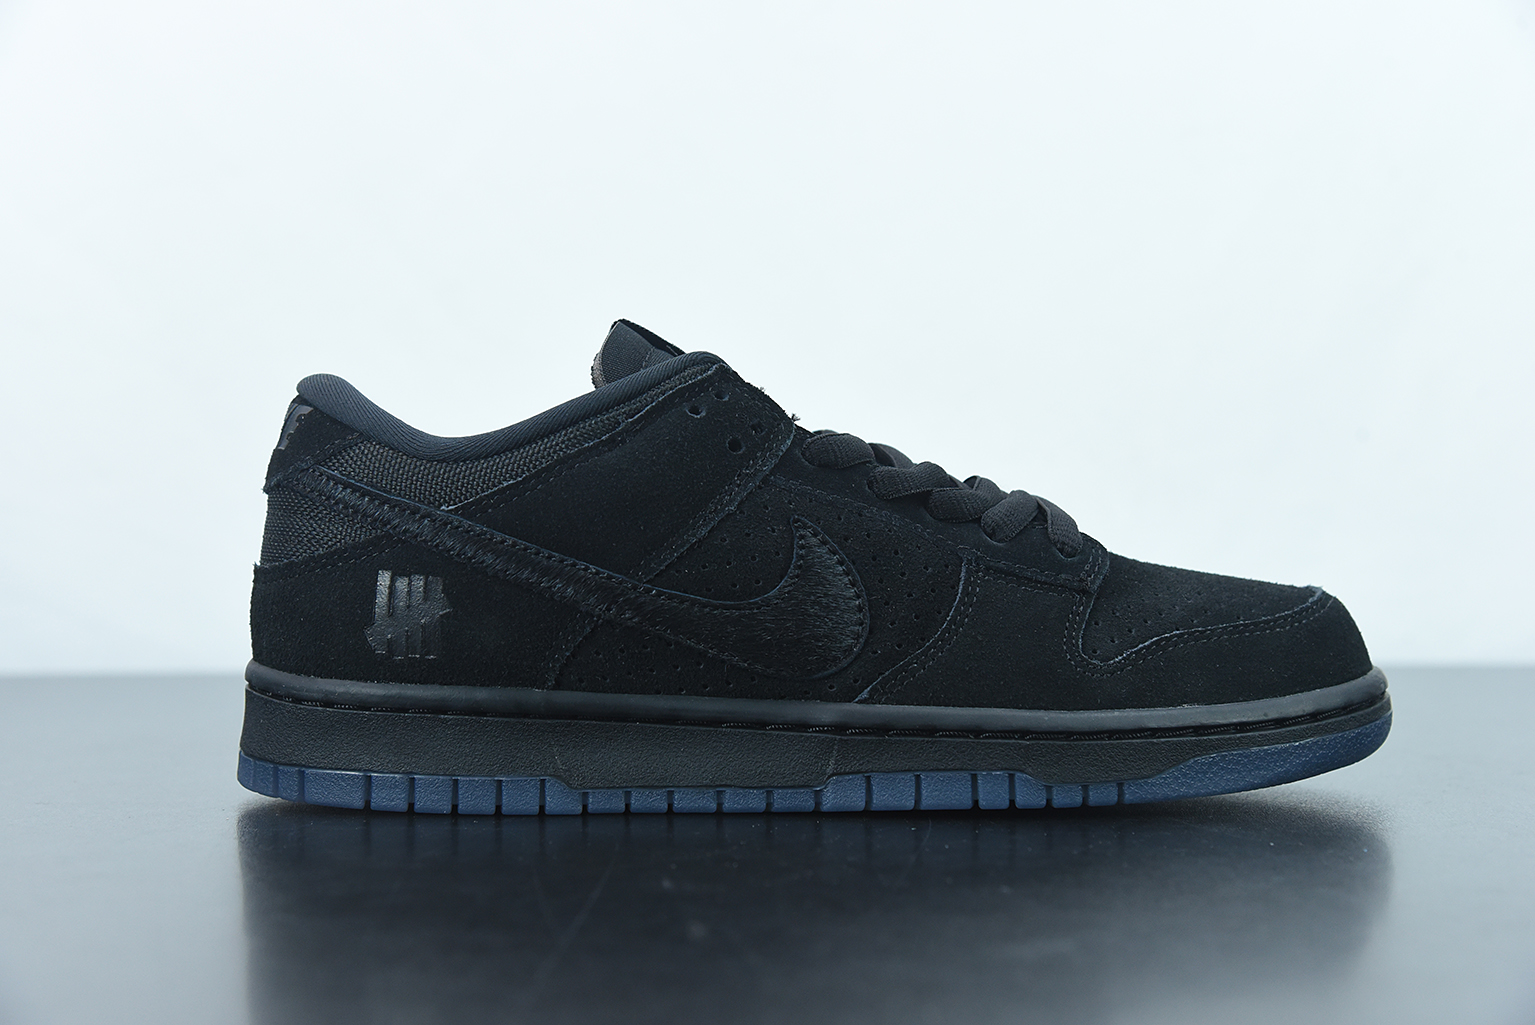 NIKE DUNK LOW X UNDEFEATED – “BLACK”